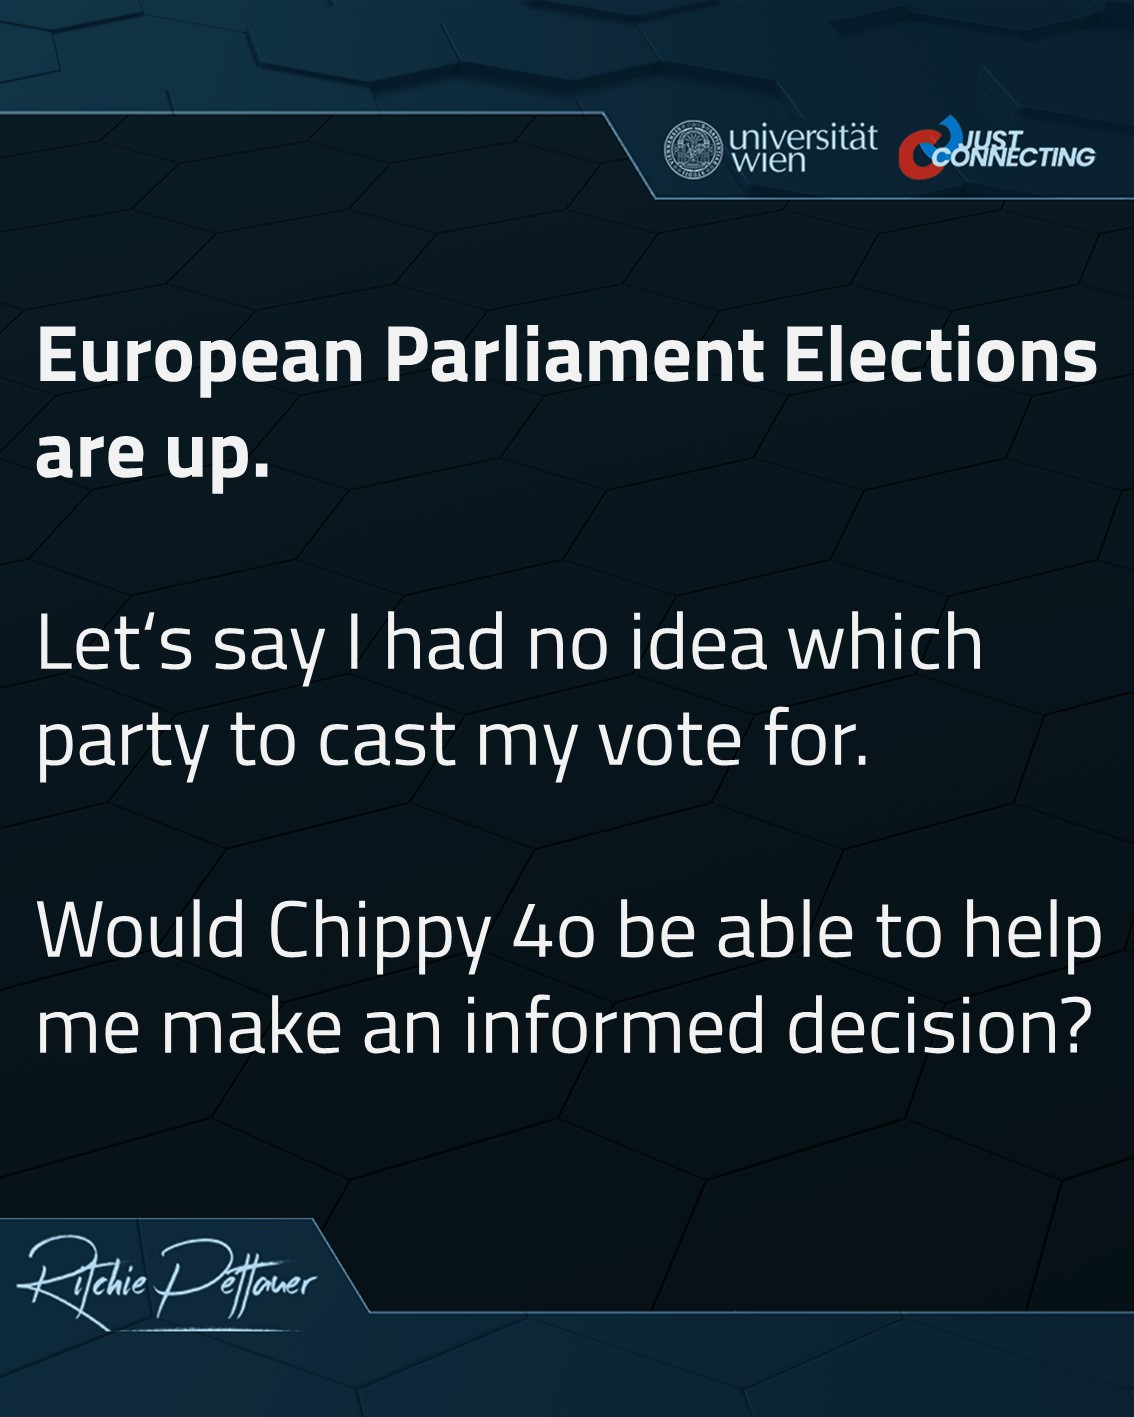 European Parliament Elections: Simplifying the Political Maze with ChatGPT